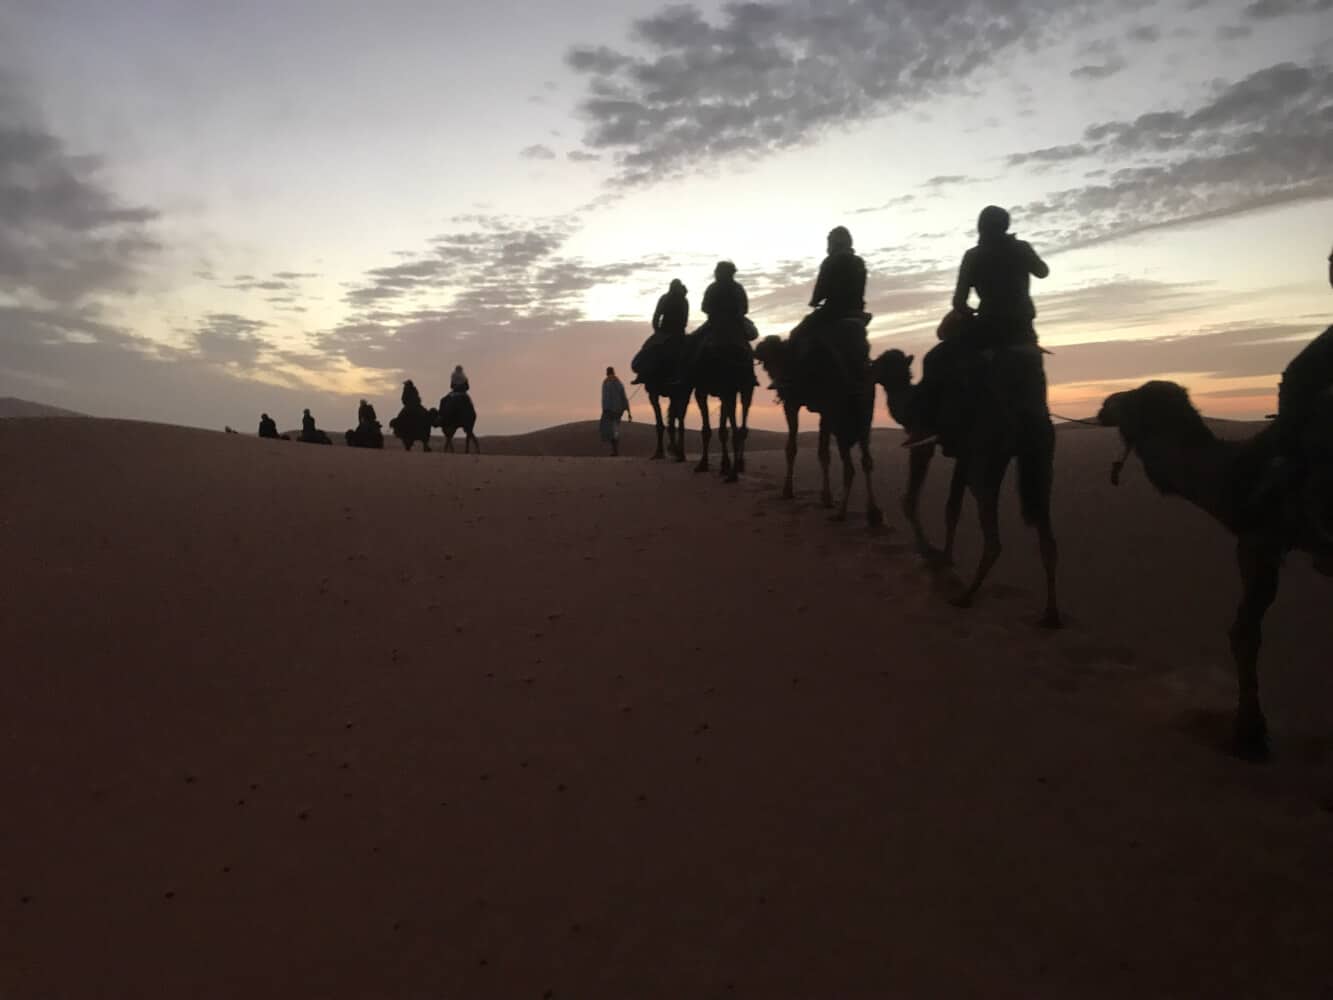 people riding camels in the desert